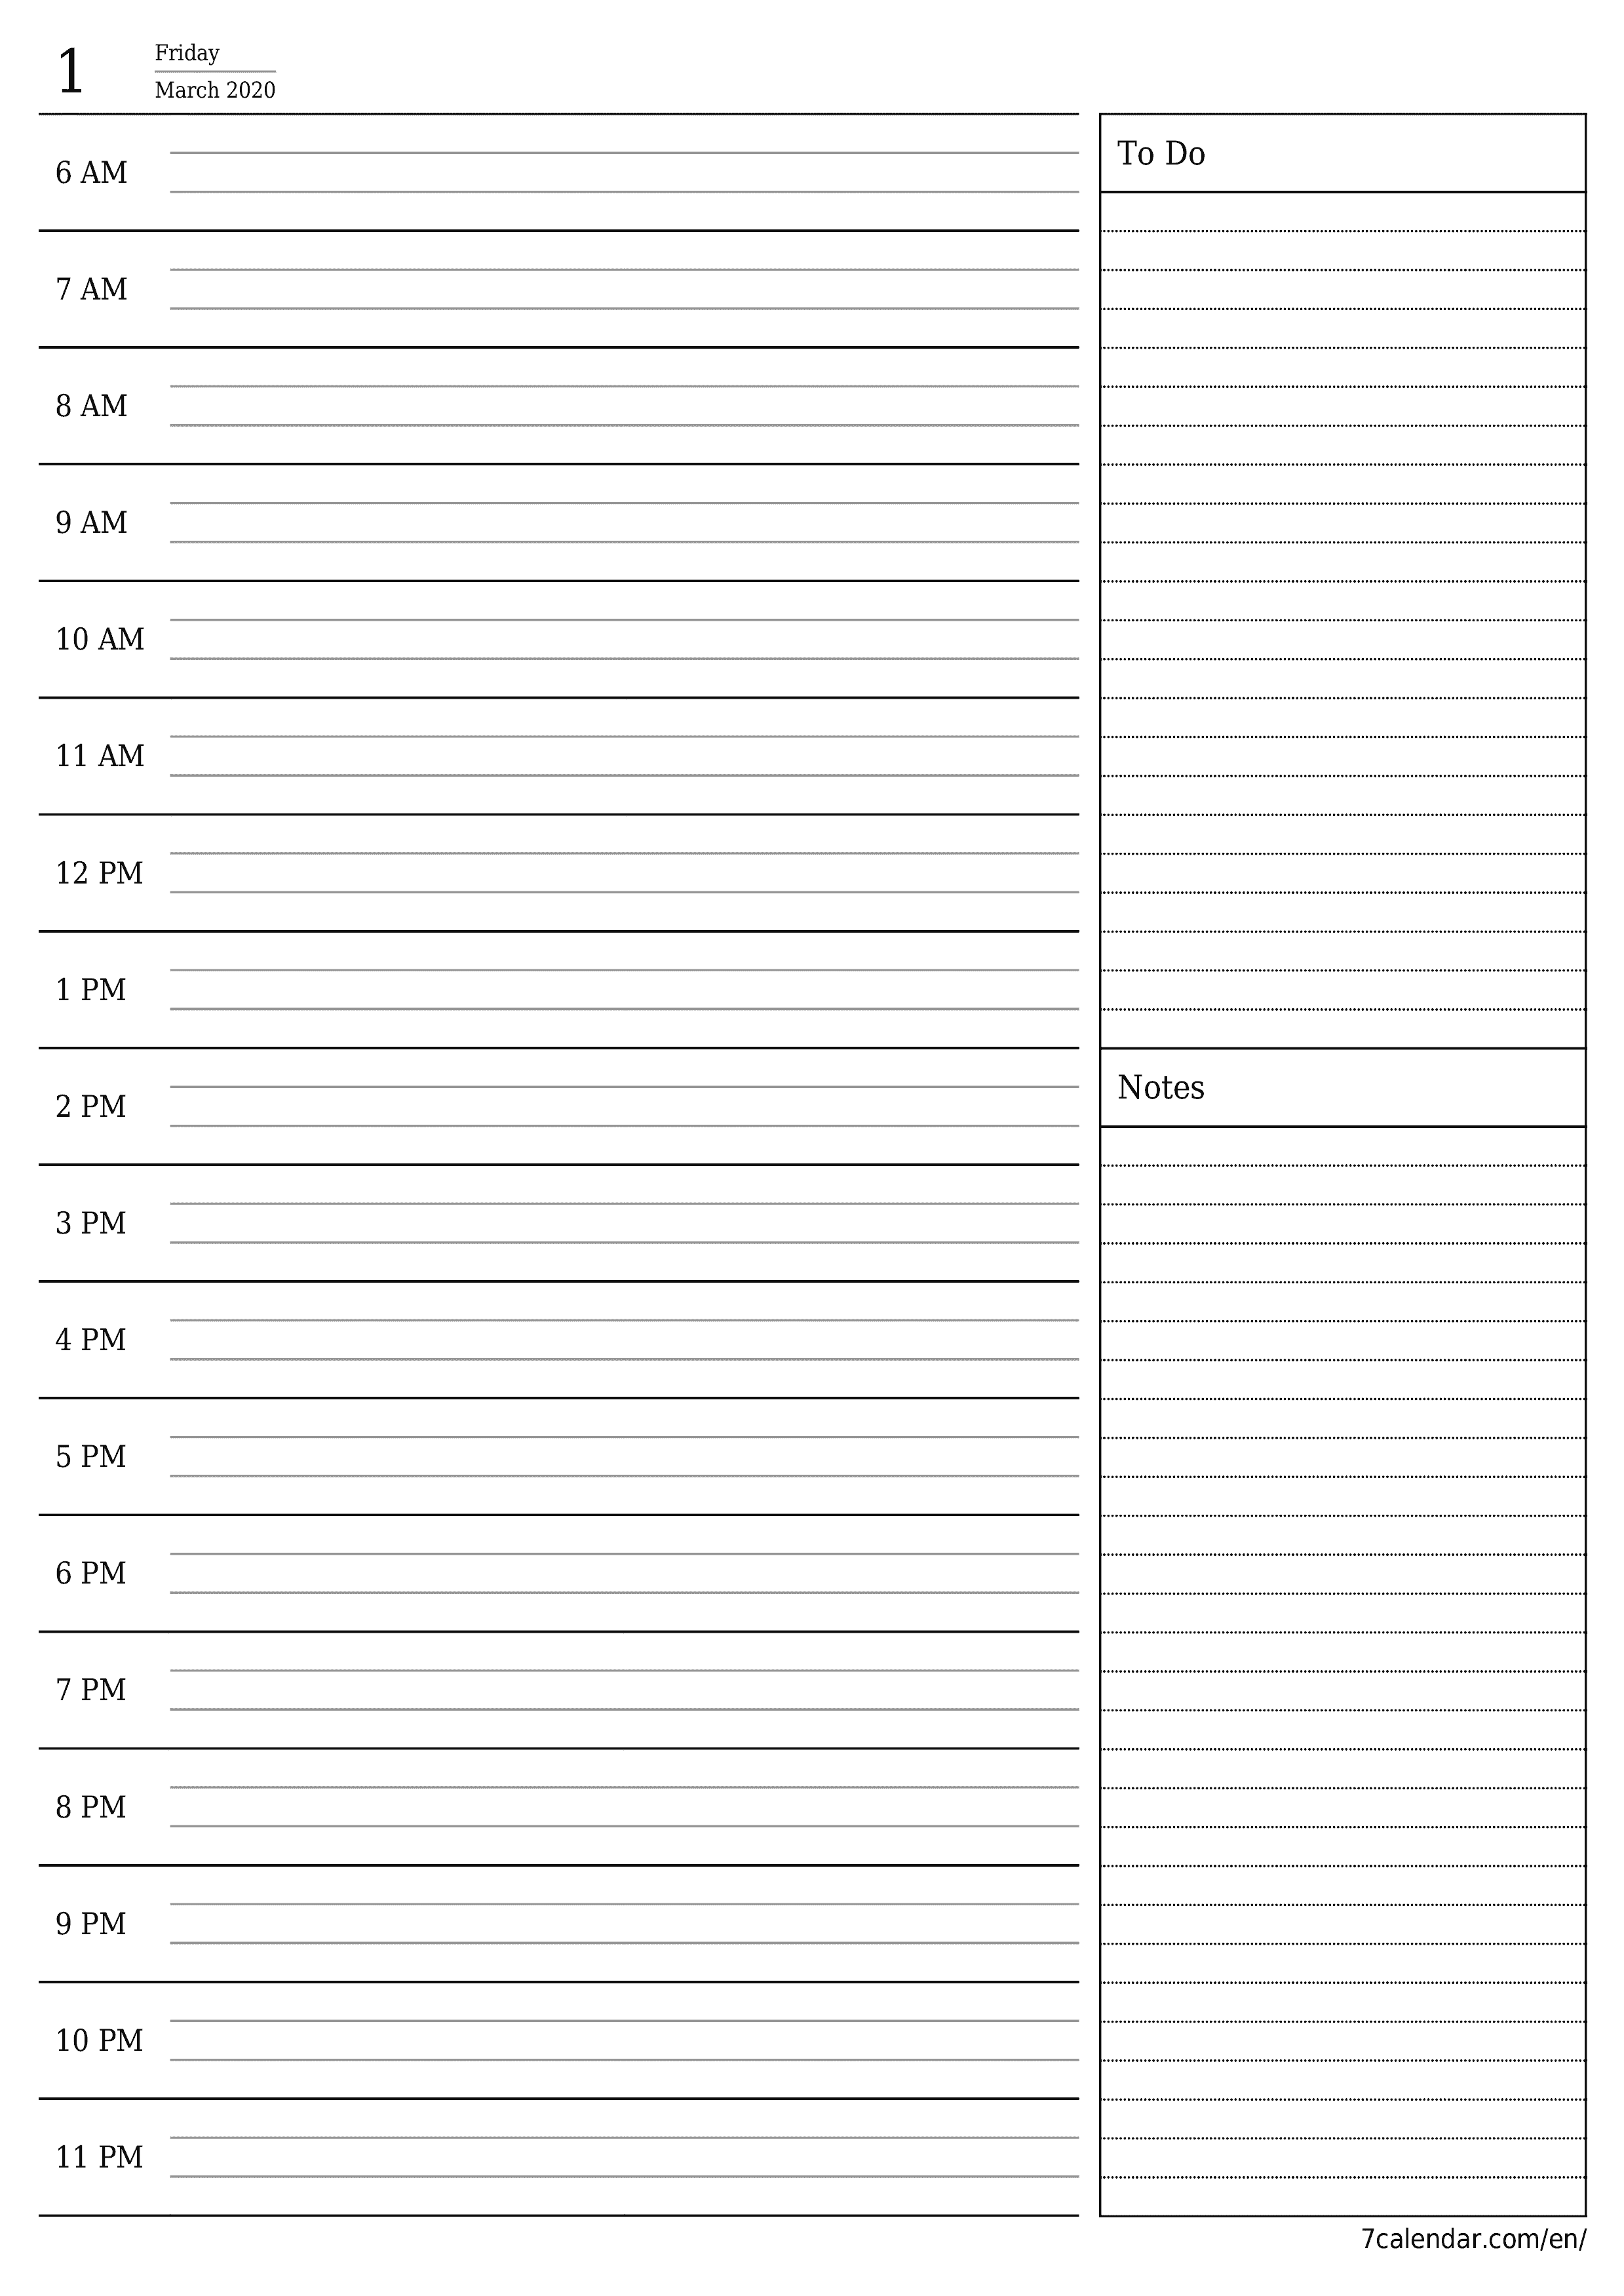 Blank daily printable calendar and planner for day March 2020 with notes, save and print to PDF PNG English